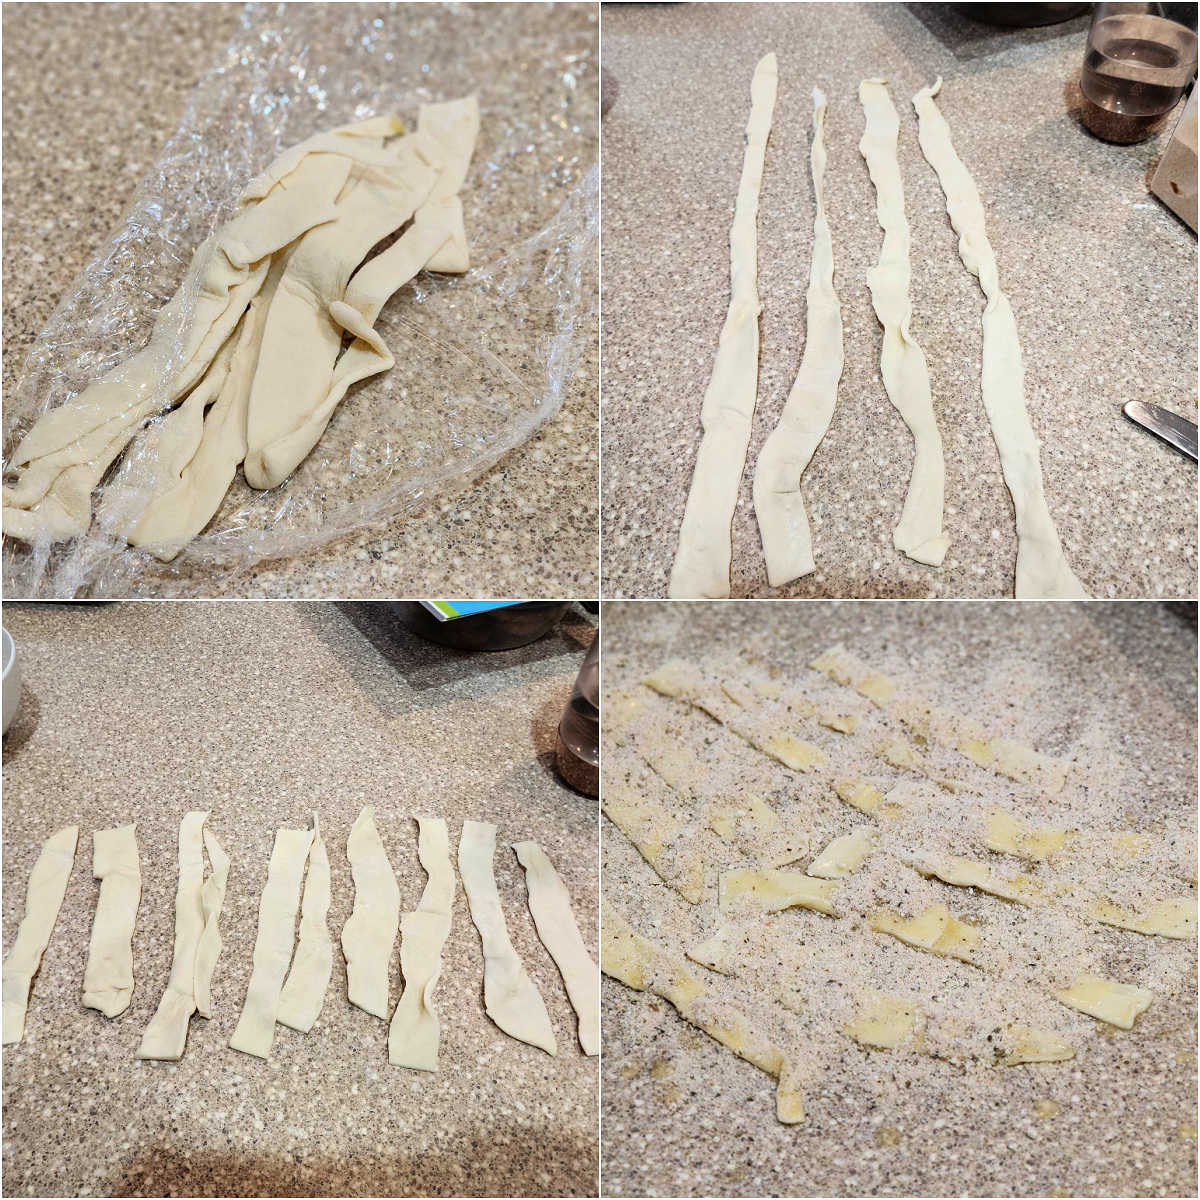 A collage of four images showing scraps of puff pastry, the scraps all laid out on a counter, the strips cut into 6